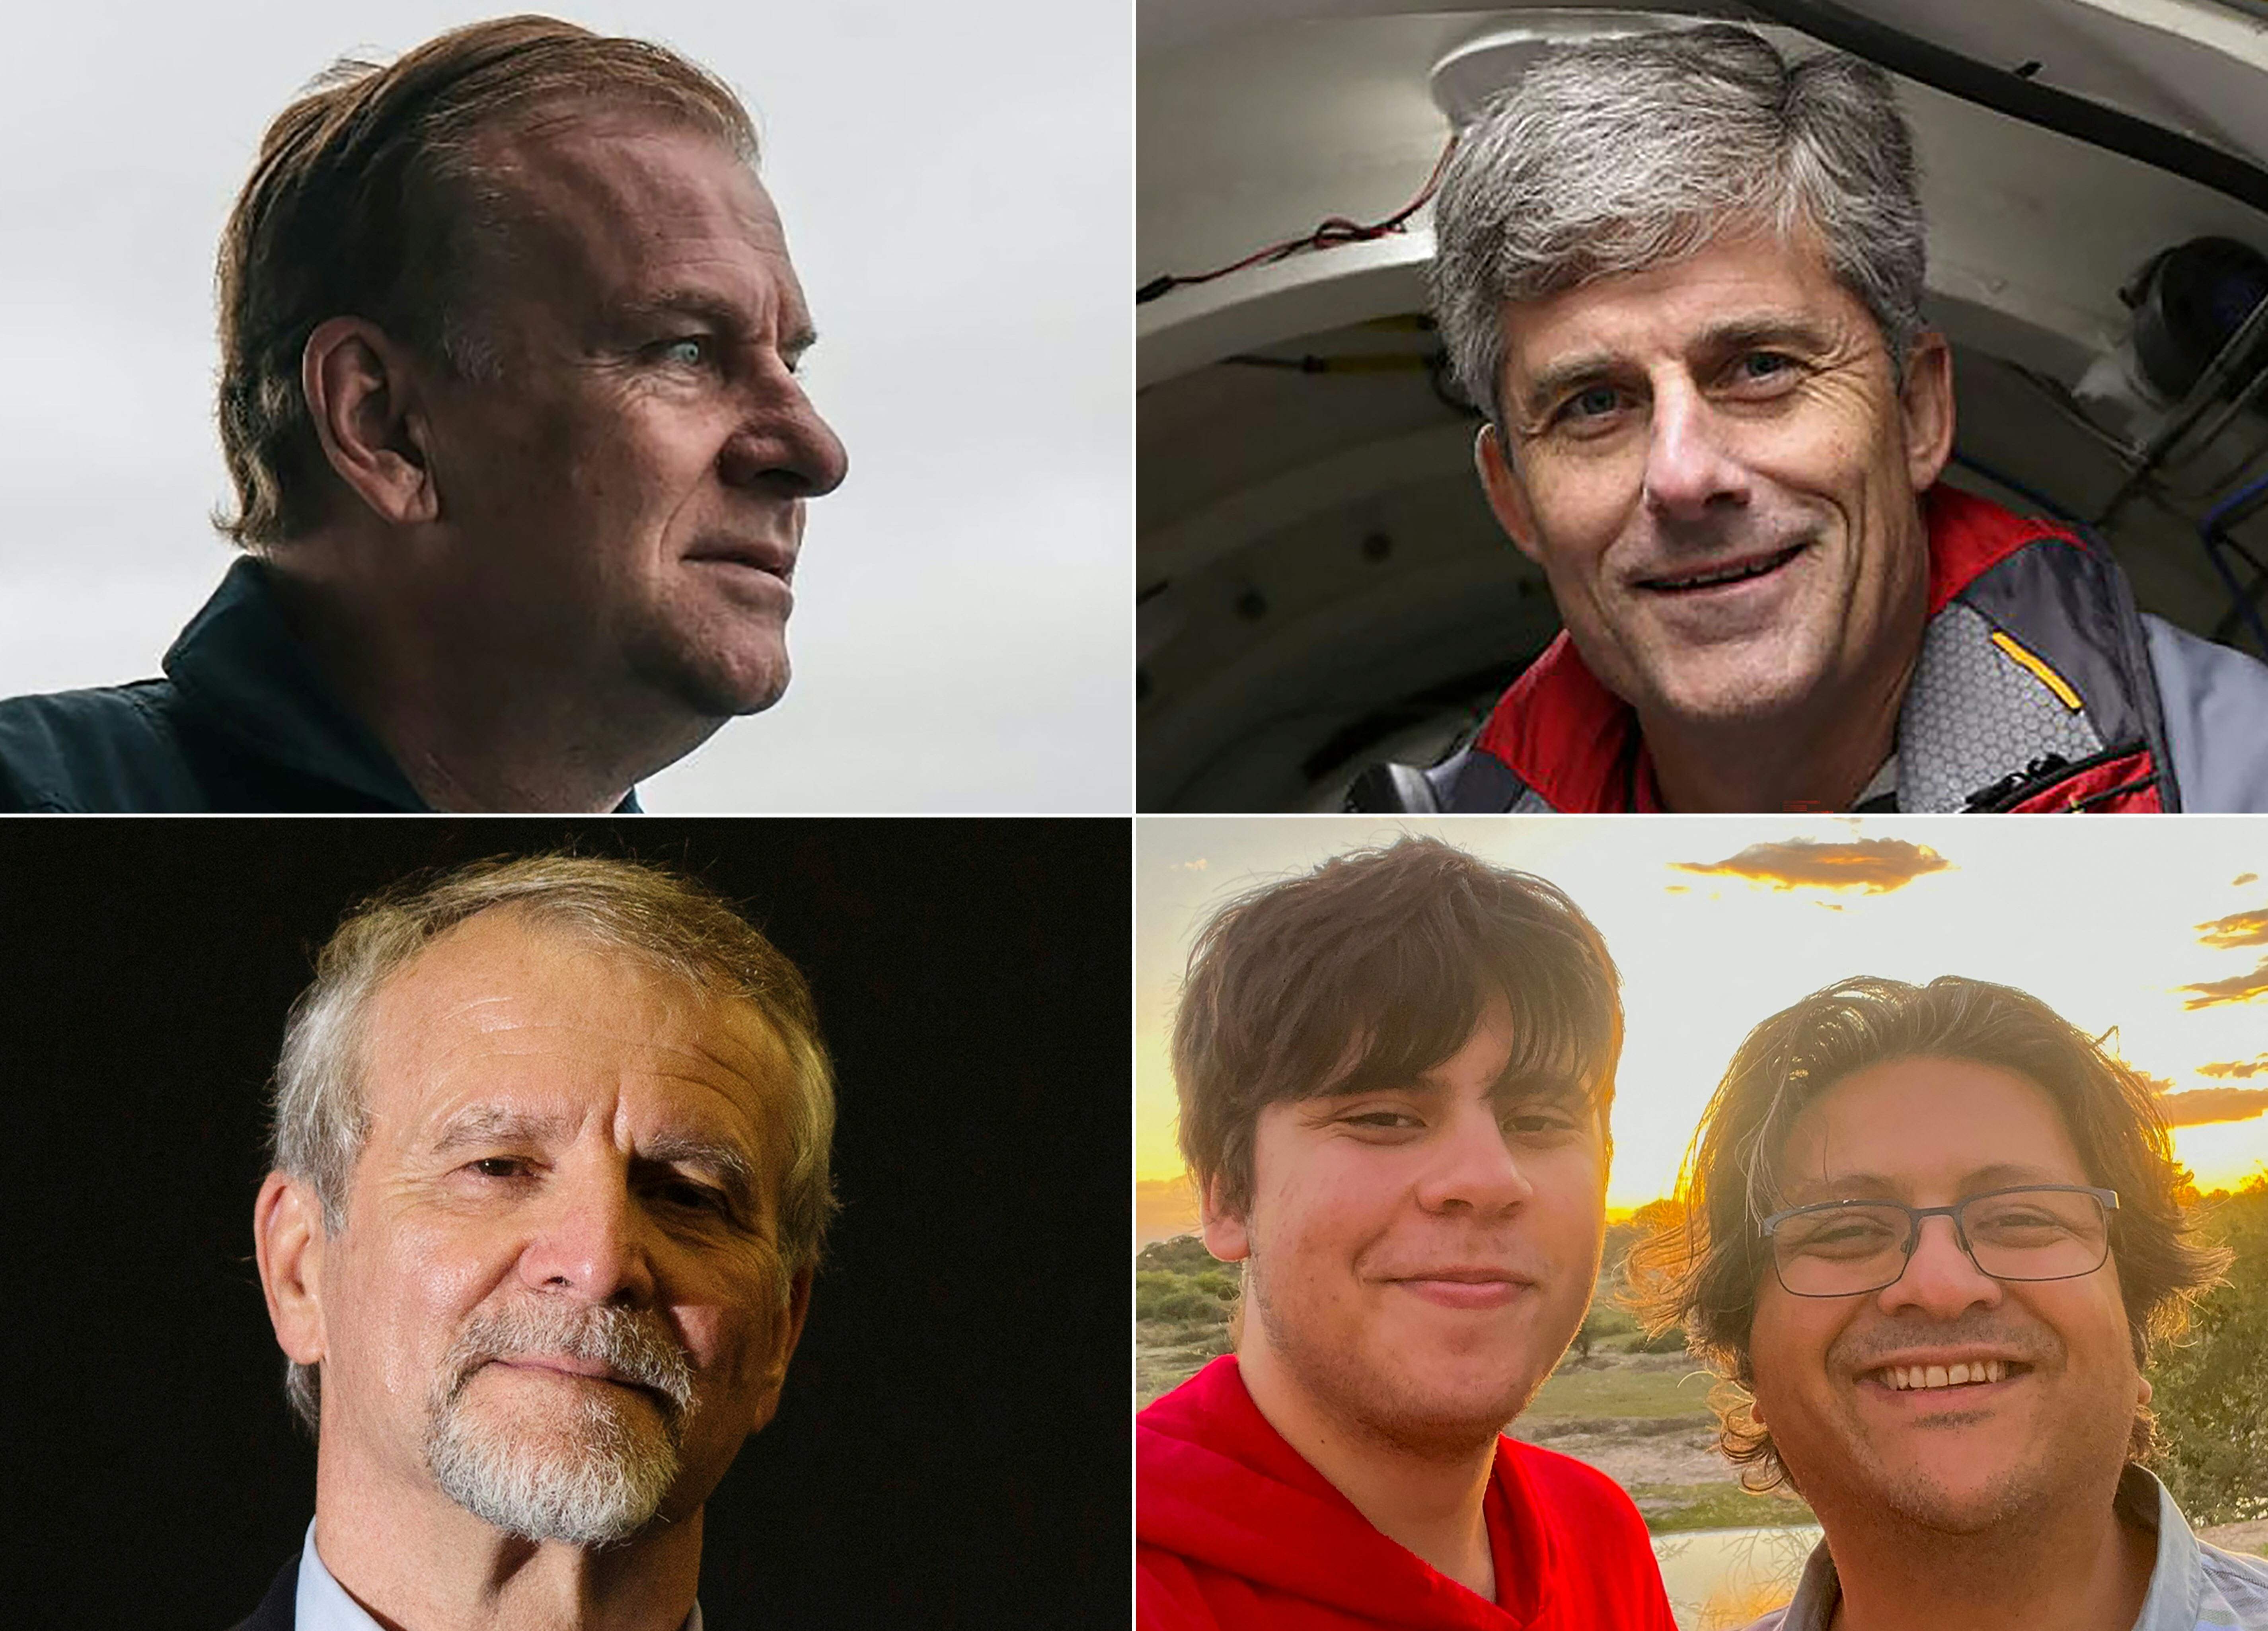 The five crew members confirmed to have died are, clockwise from top left, Hamish Harding, Stockton Rush, Shahzada and Suleman Dawood, and Paul-Henri Nargeolet.